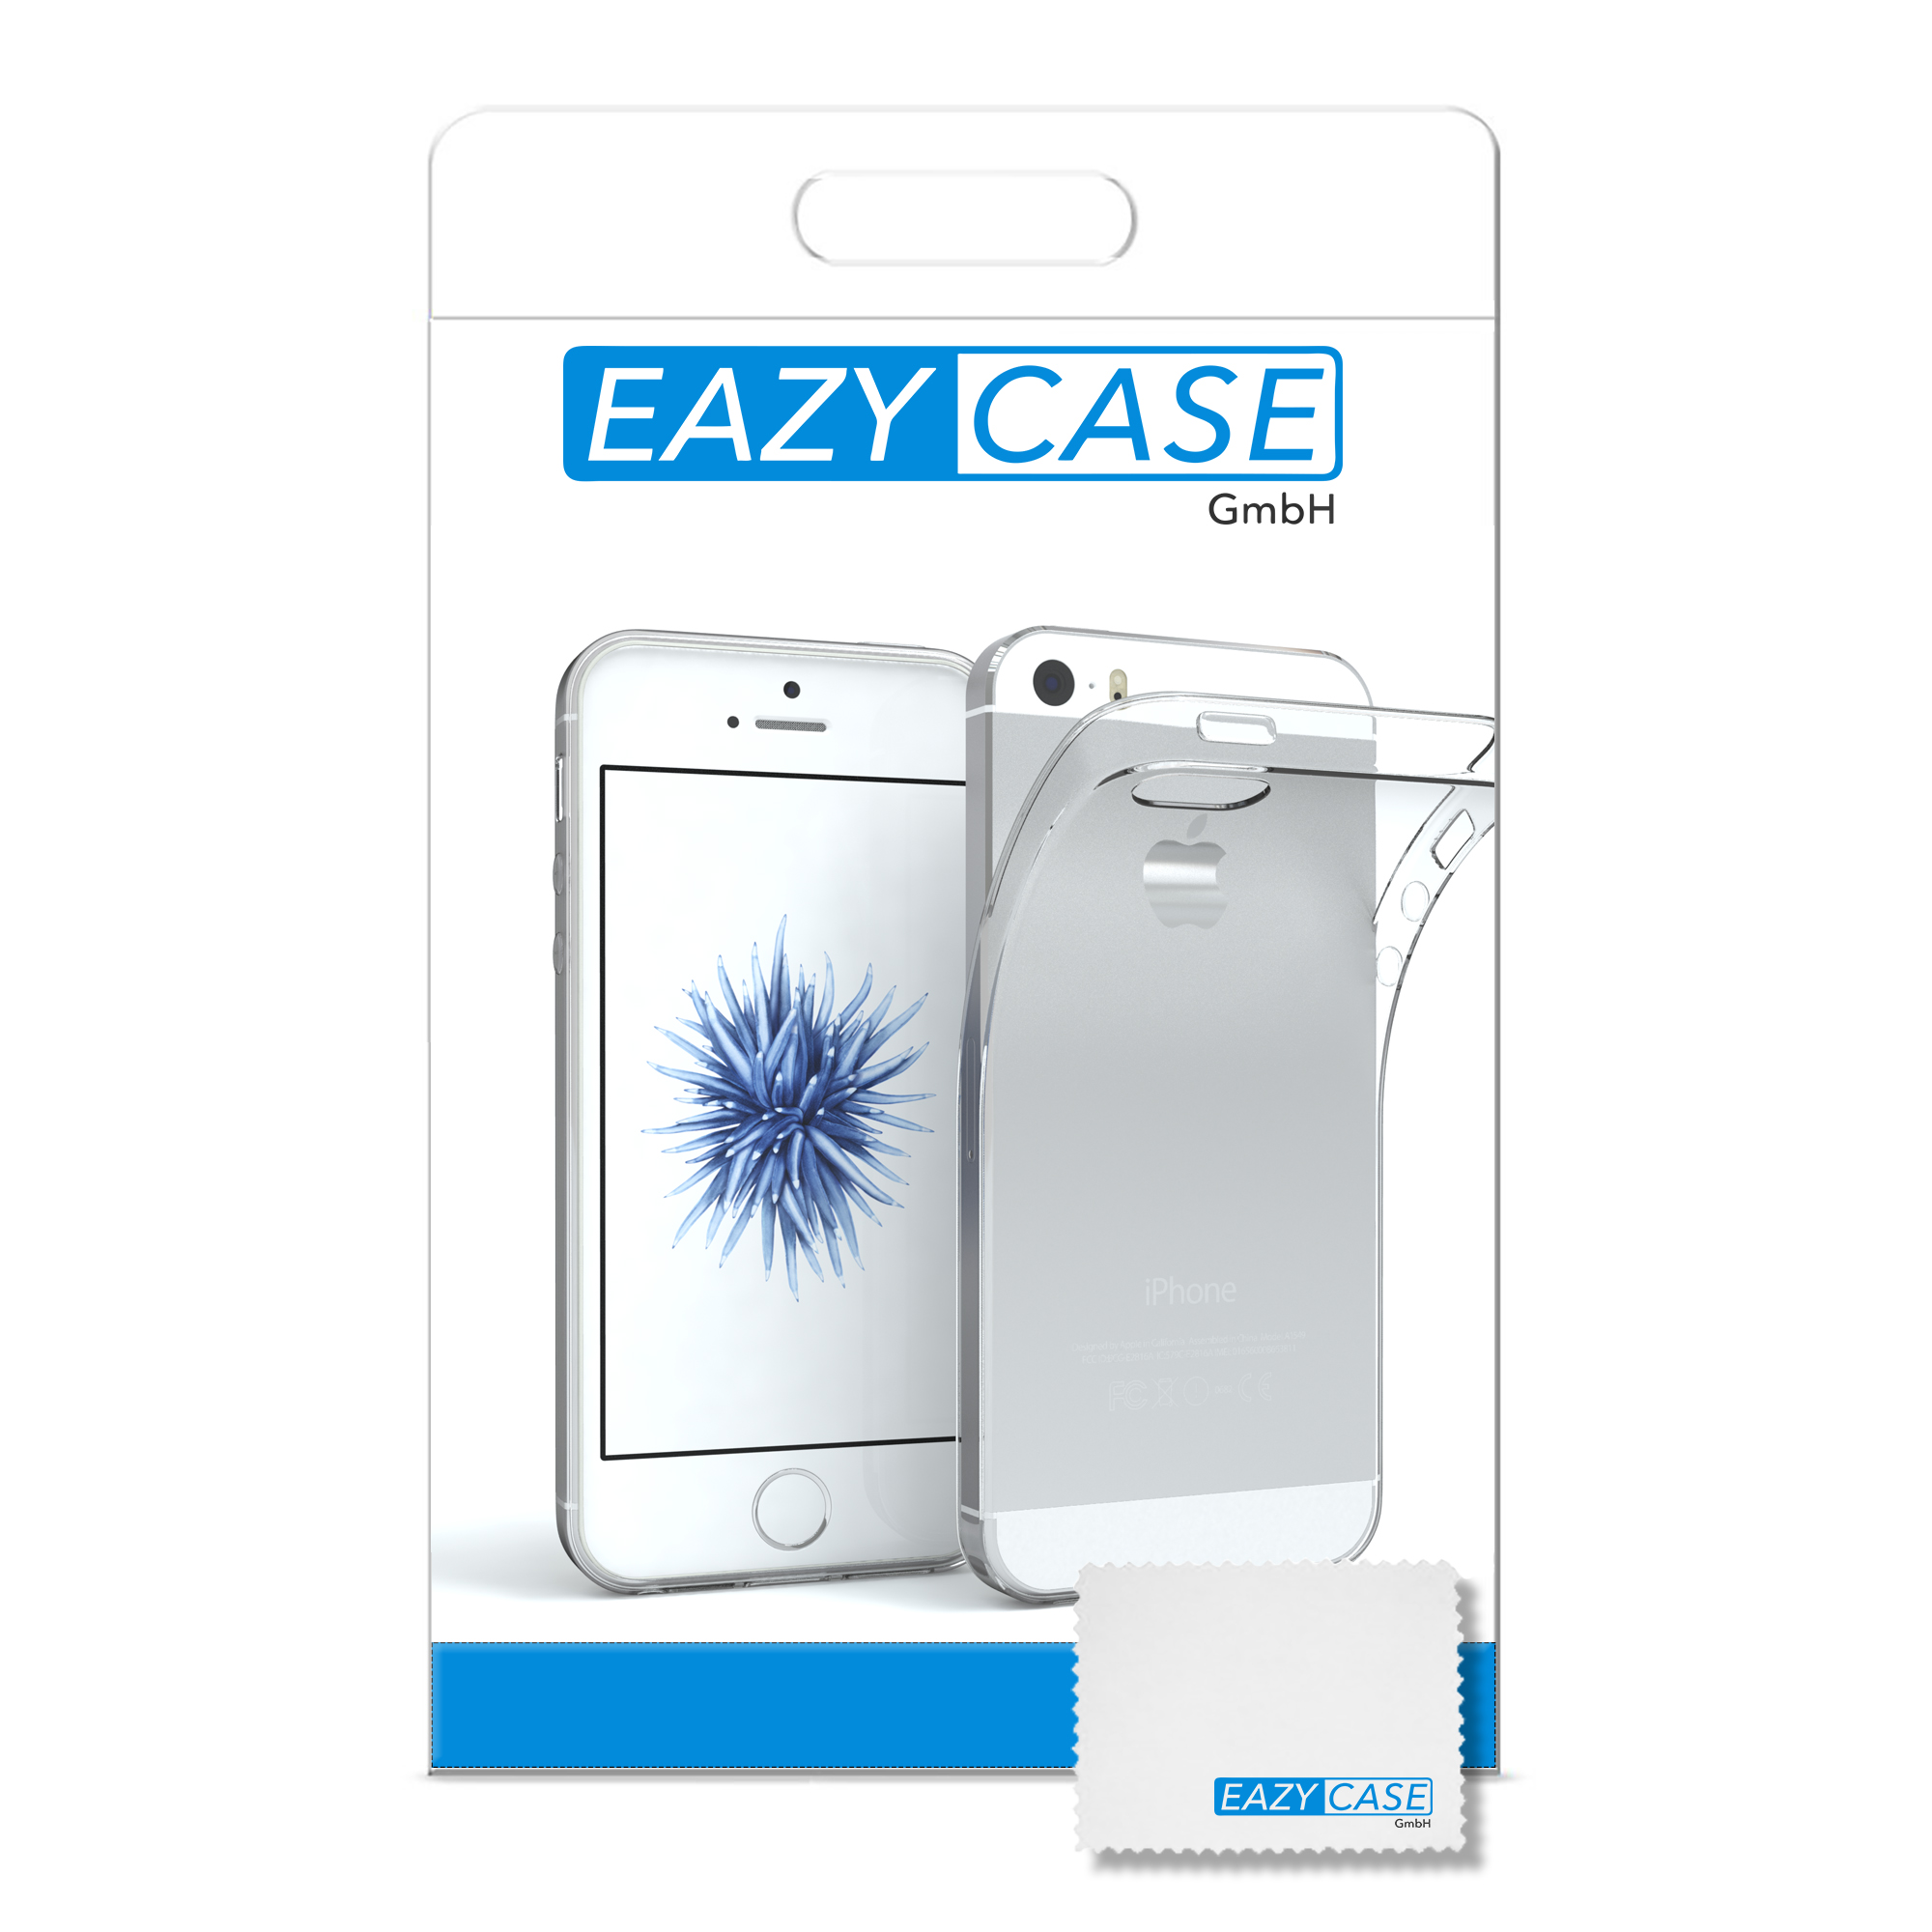 EAZY CASE 2016, Backcover, Clear, / iPhone iPhone Slimcover Durchsichtig 5S, 5 Apple, SE